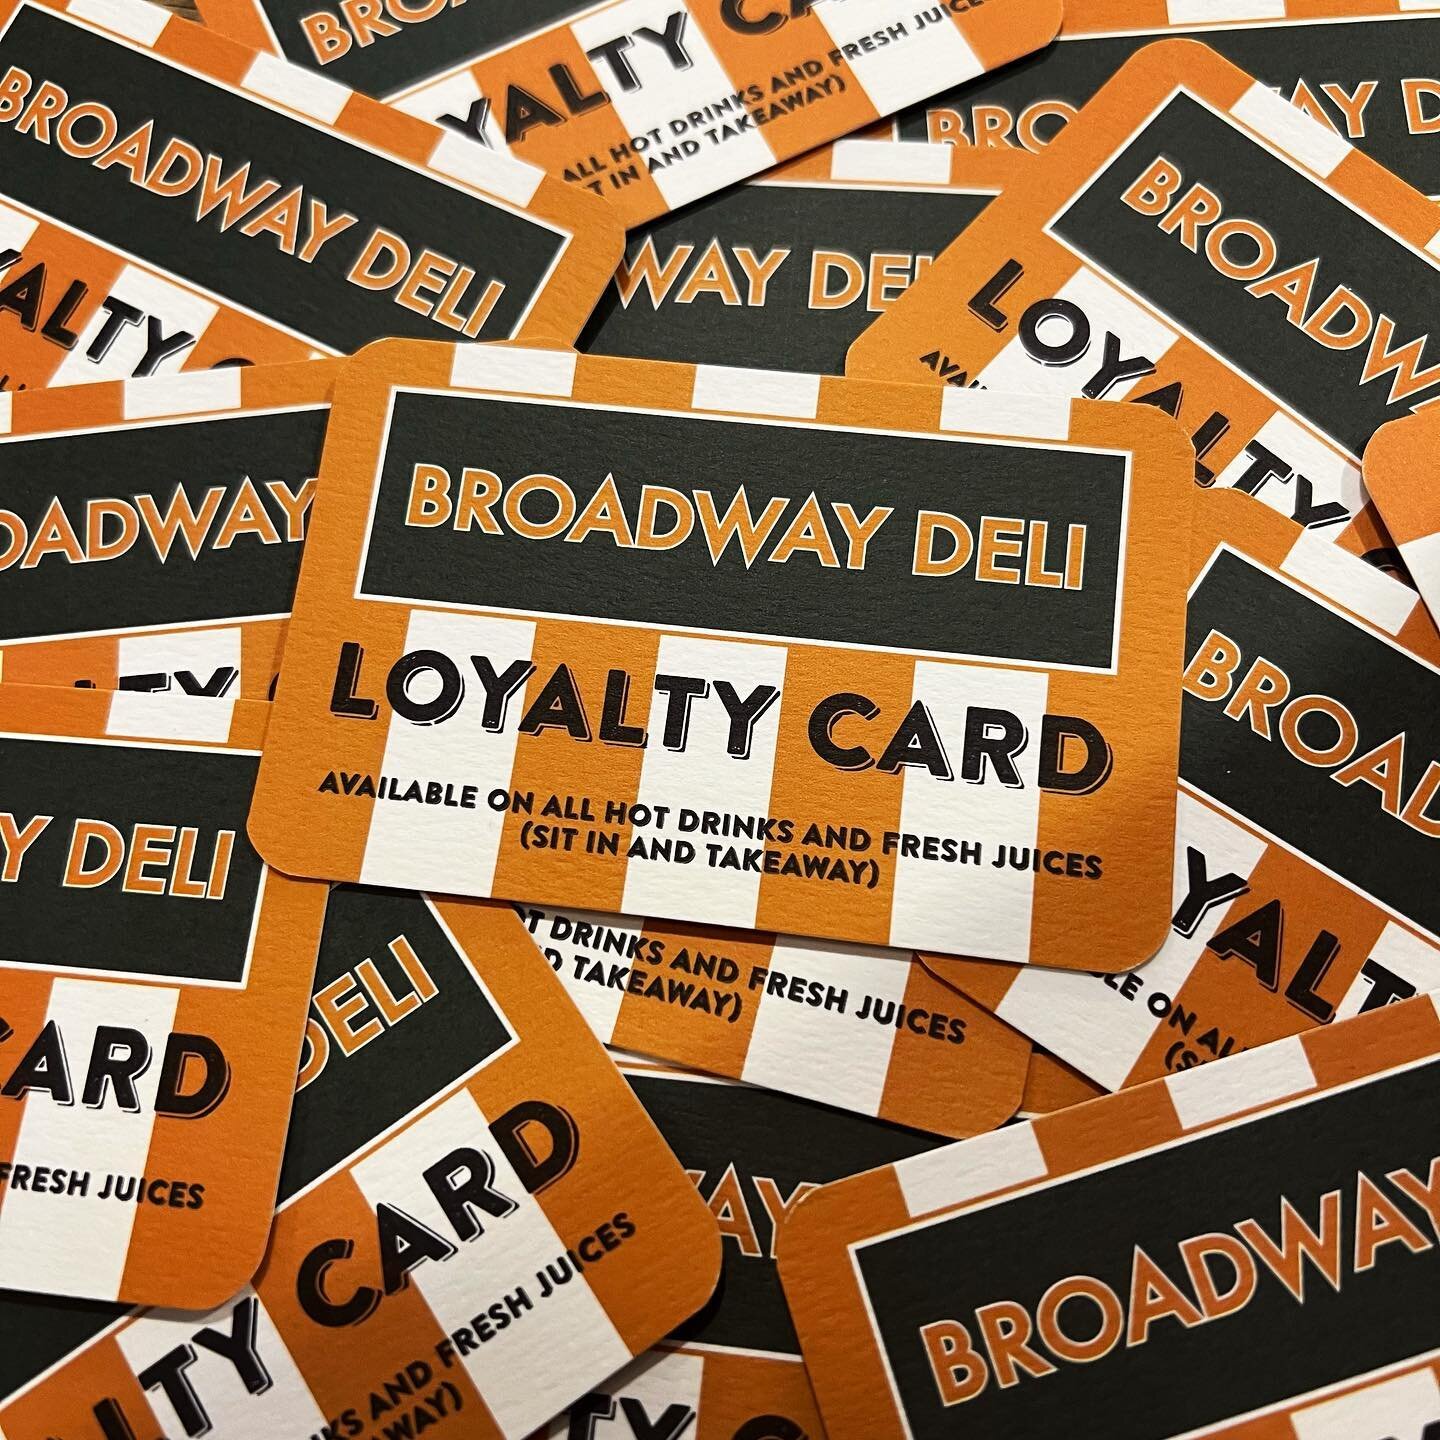 LOYALTY CARDS PEOPLE!!! Available on all tea, coffee and fresh juices to sit in or take-away #deli #loyalty #cards #loyaltycards #local #supportsmallbusiness #localbusiness #broadway #coffee #tea #juice